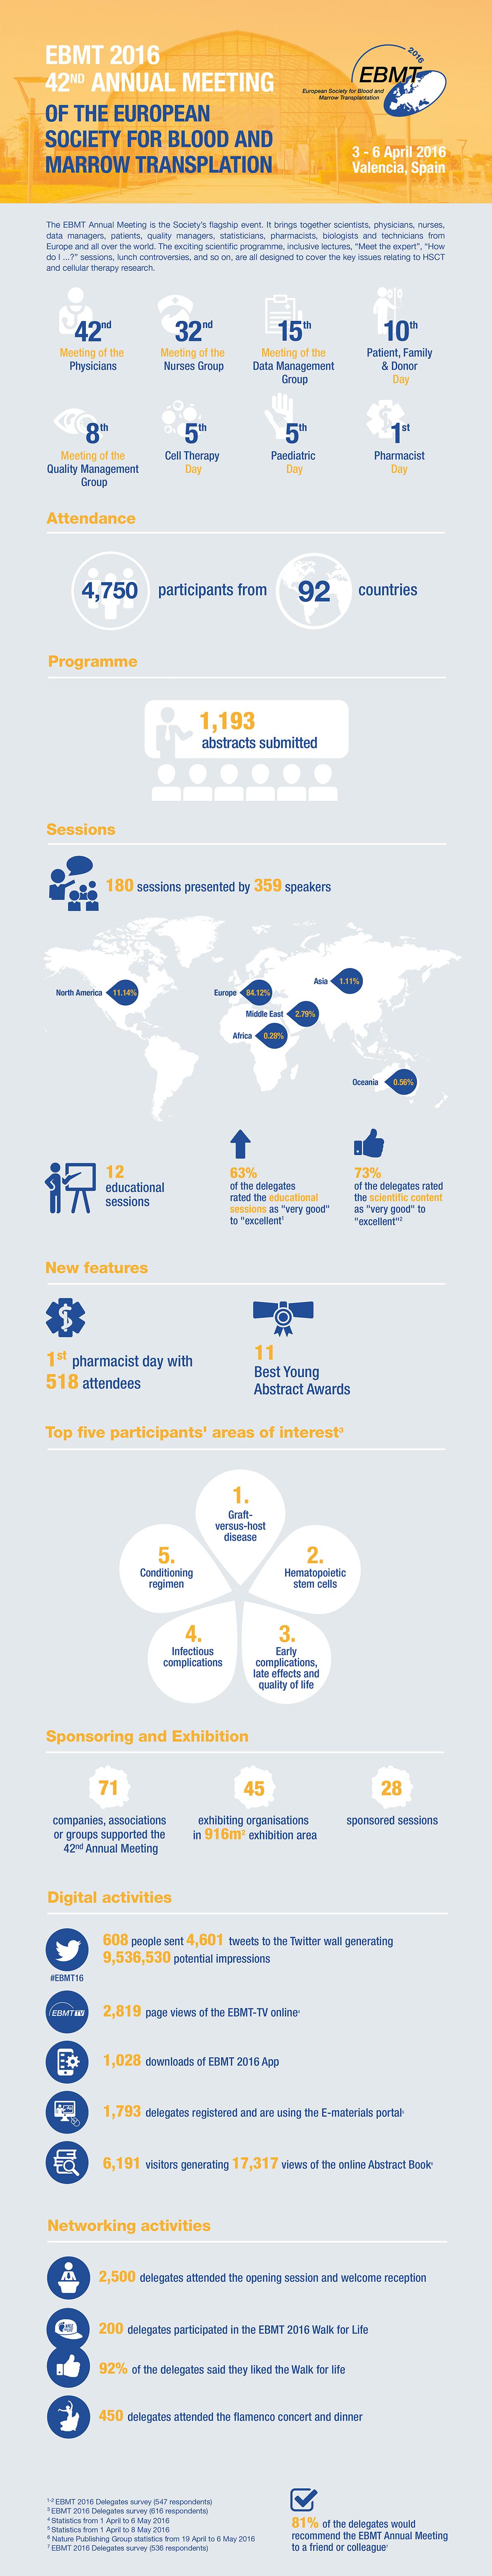 Infographic Report Annual Meeting EBMT 2016